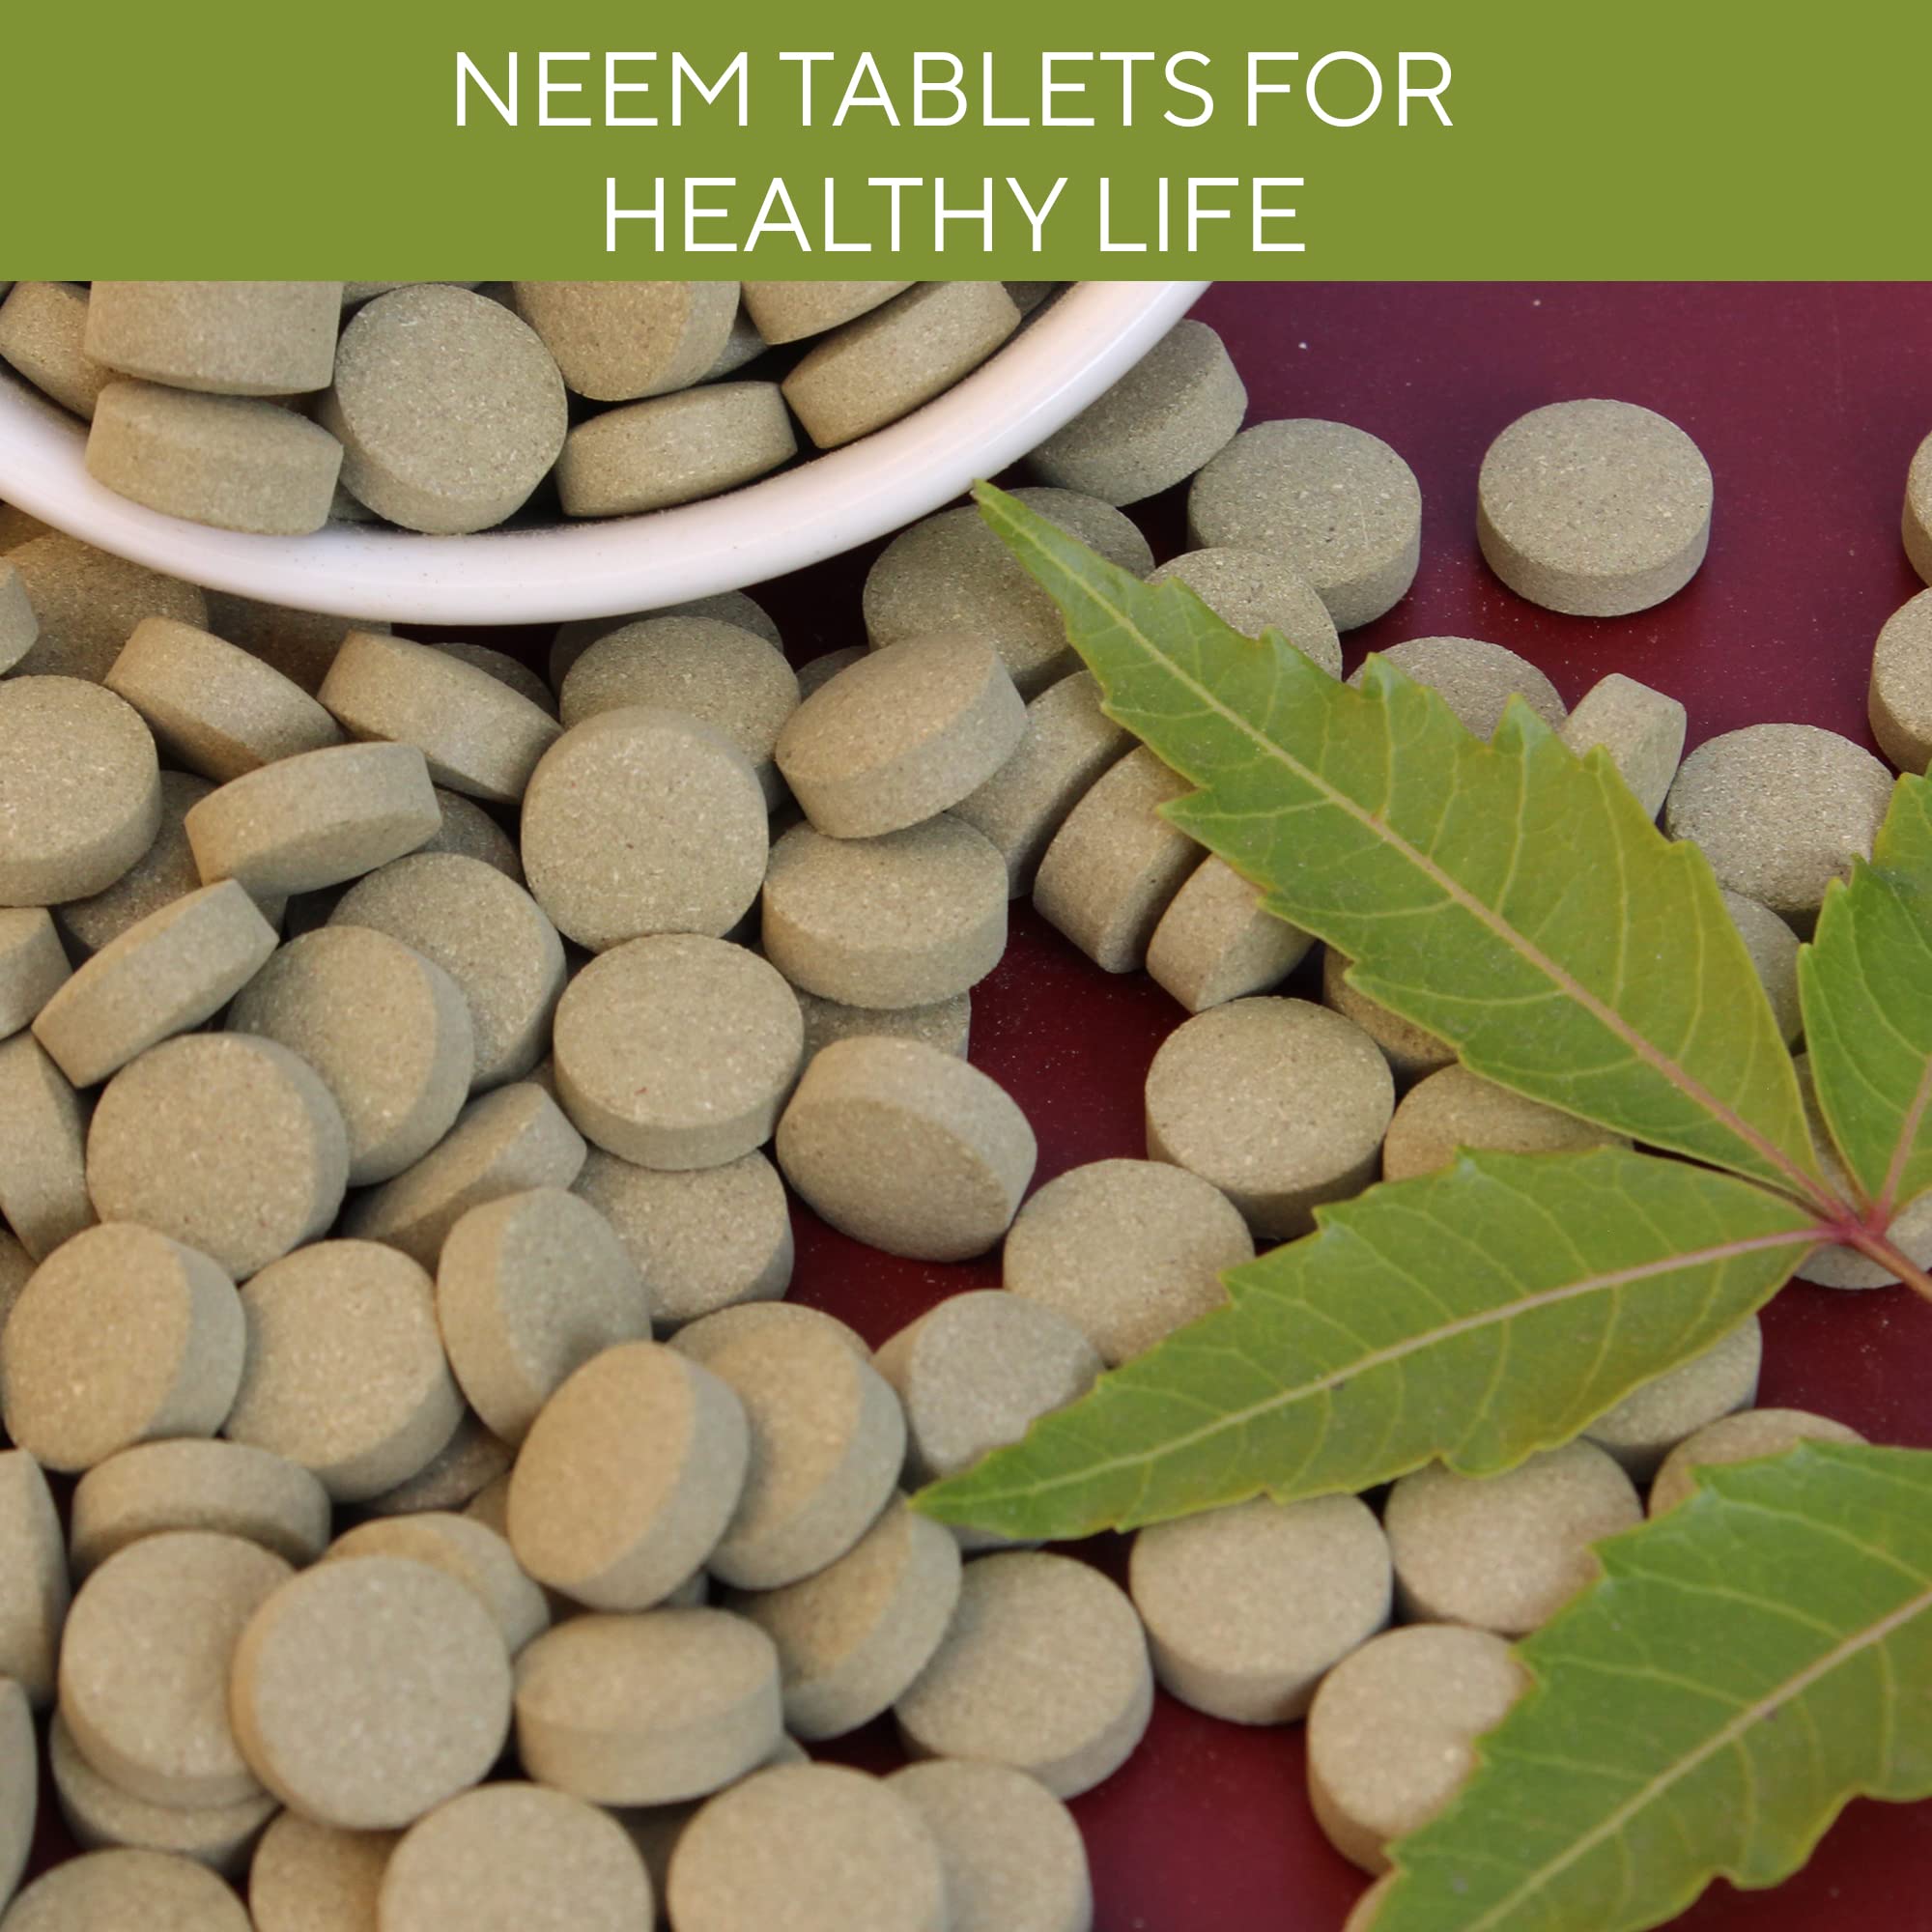 Grenera Neem Tablets 240 nos, Made Using Pure Neem Leaves (Azadirachta Indica), Kosher, Halal Certified Supplement